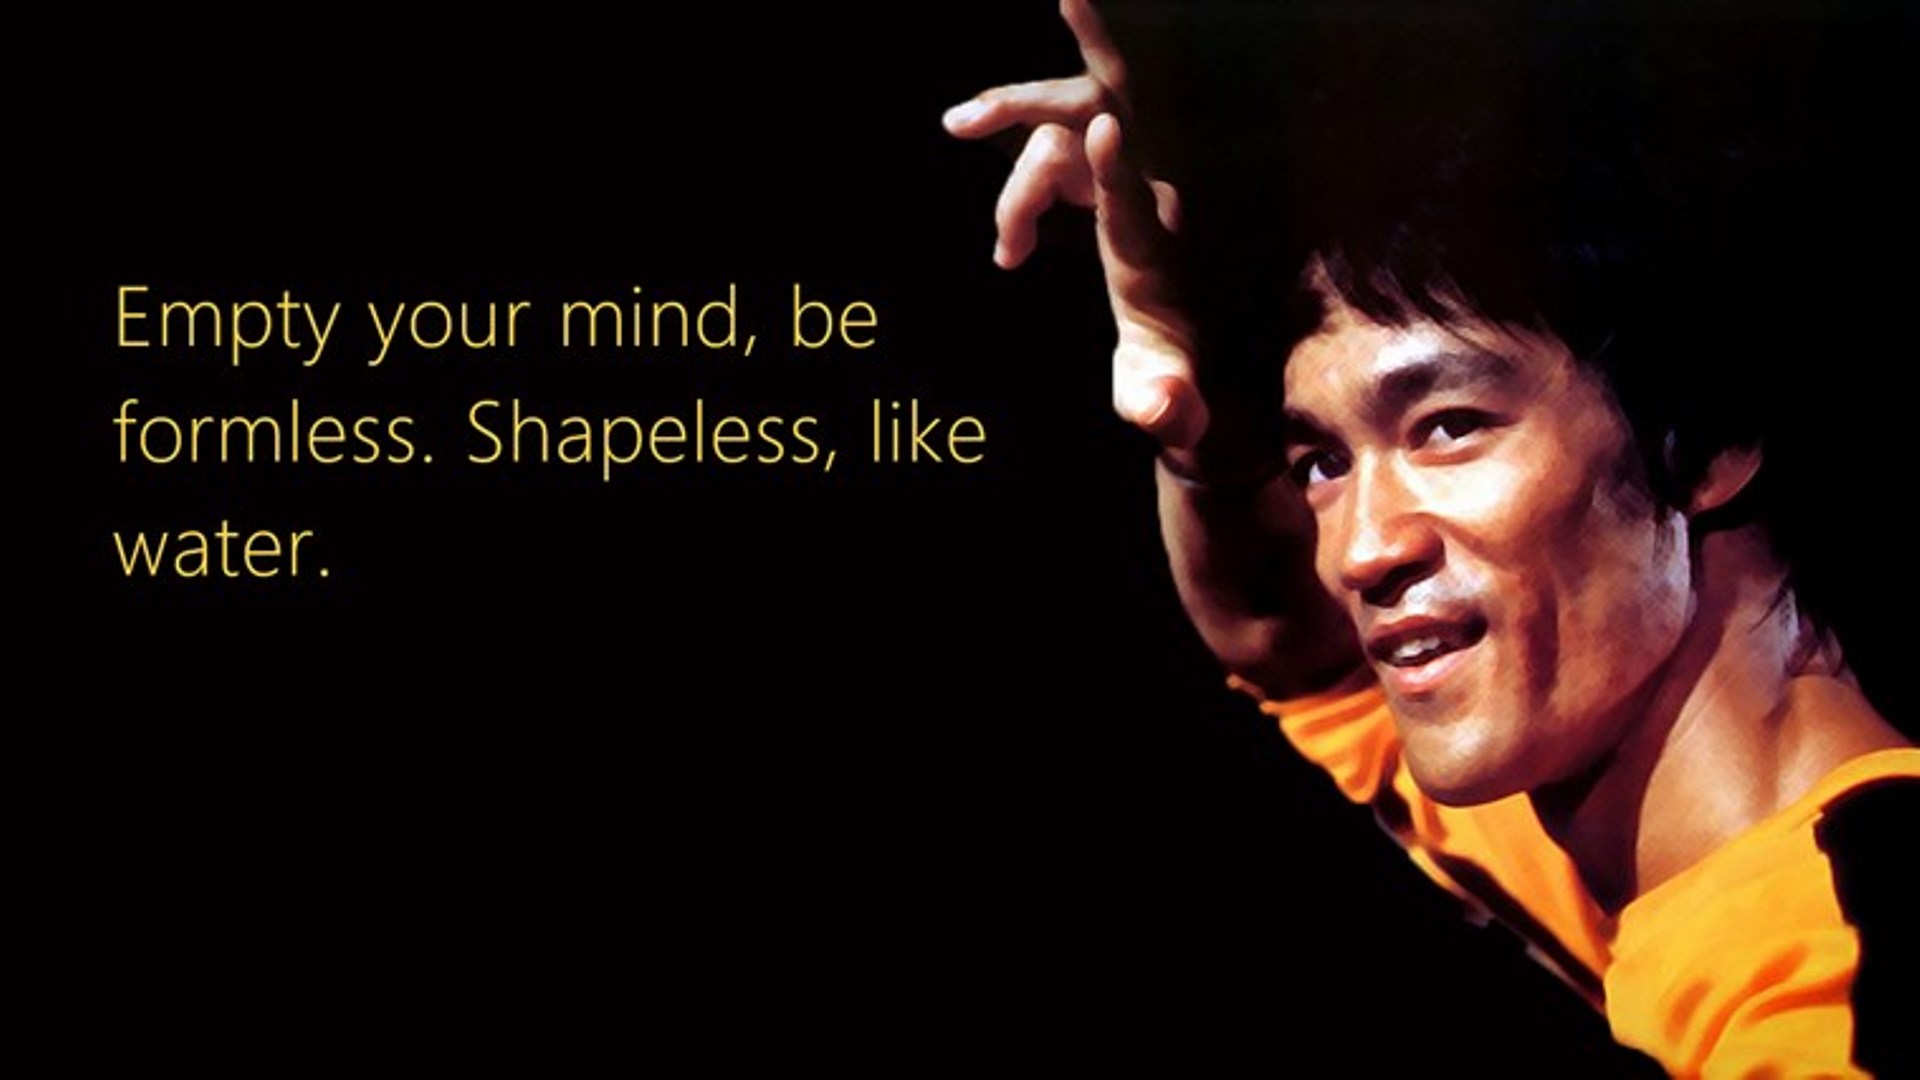 HD Bruce Lee Image Kb Wallpaper And Pictures Bg